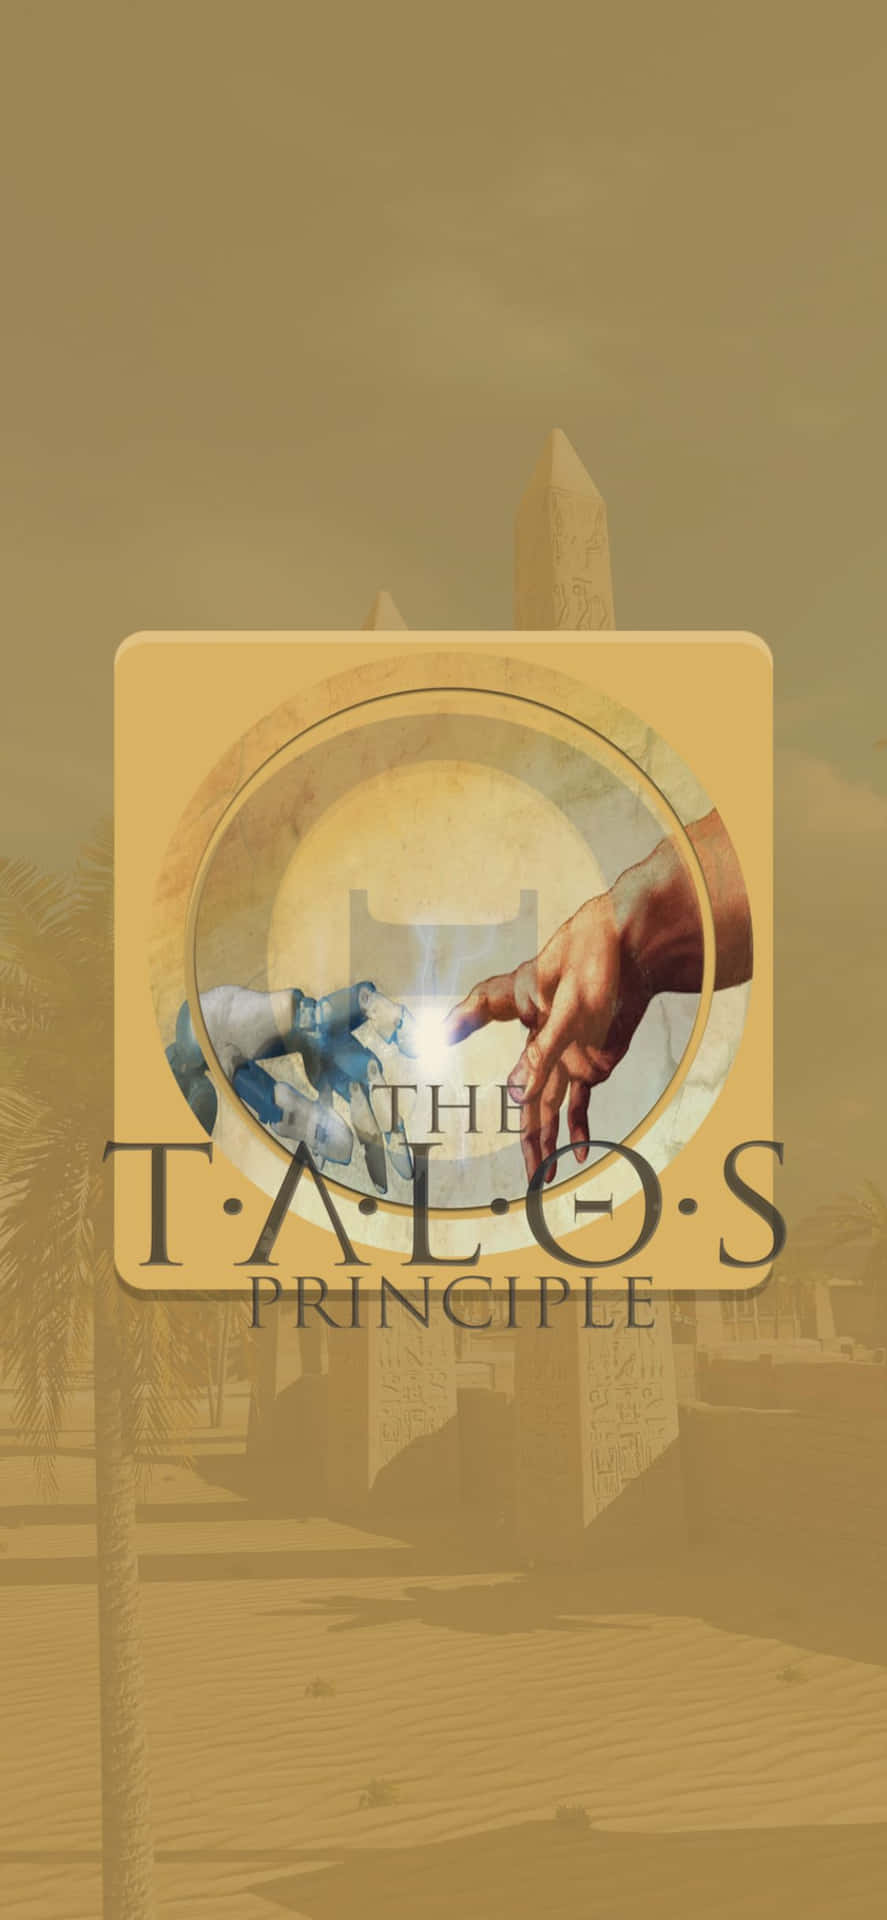 "Experience The Talos Principle on the Iphone Xs"